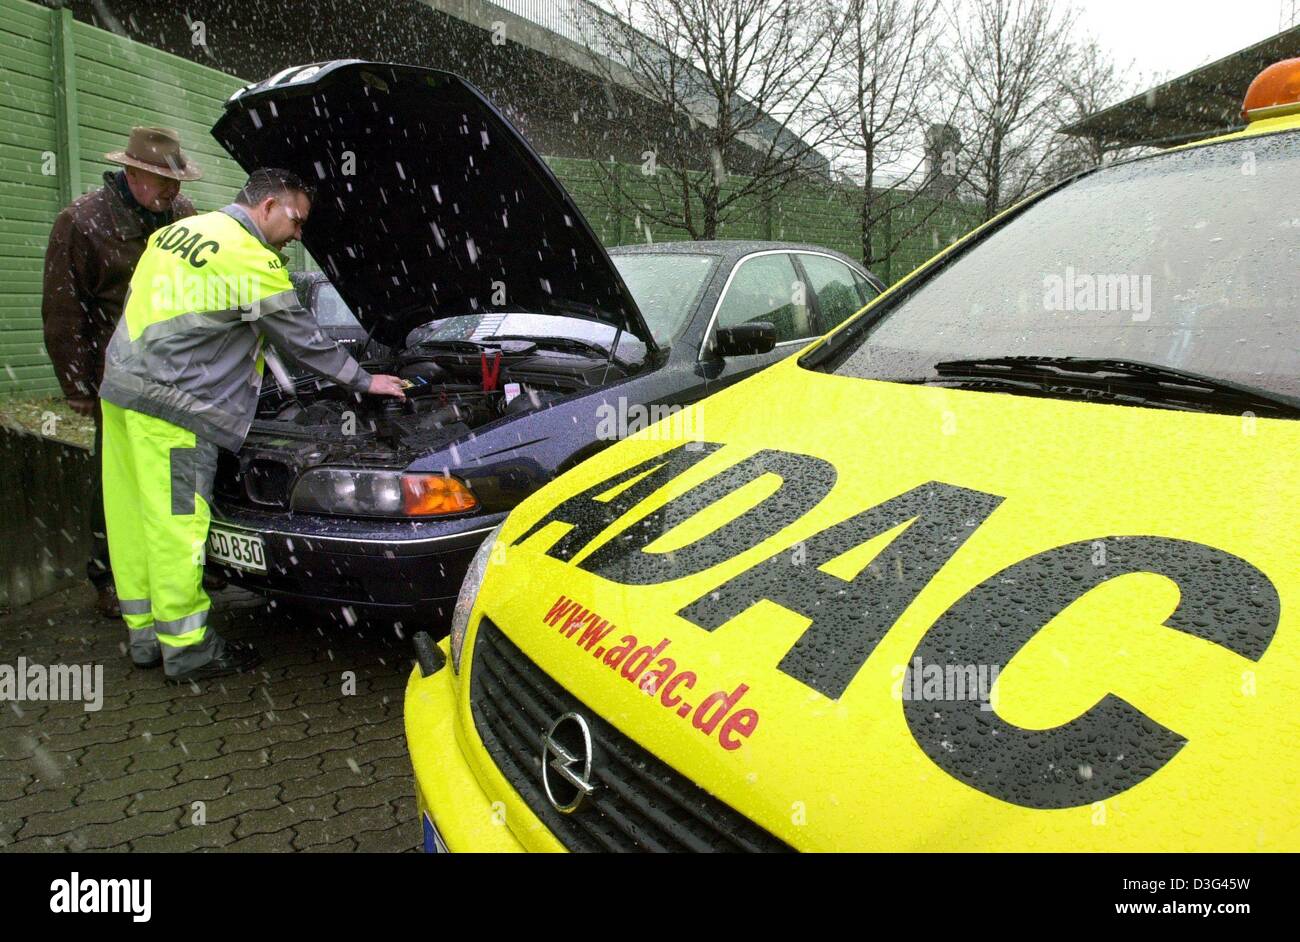 (dpa) - A 'yellow angel' of the German auto club ADAC (Allgemeiner Deutscher Automobil Club) repairs a broken down car in Freiburg, Germany, 4 February 2003. In 2002, ADAC workers received 3.55 million emergency calls. Stock Photo